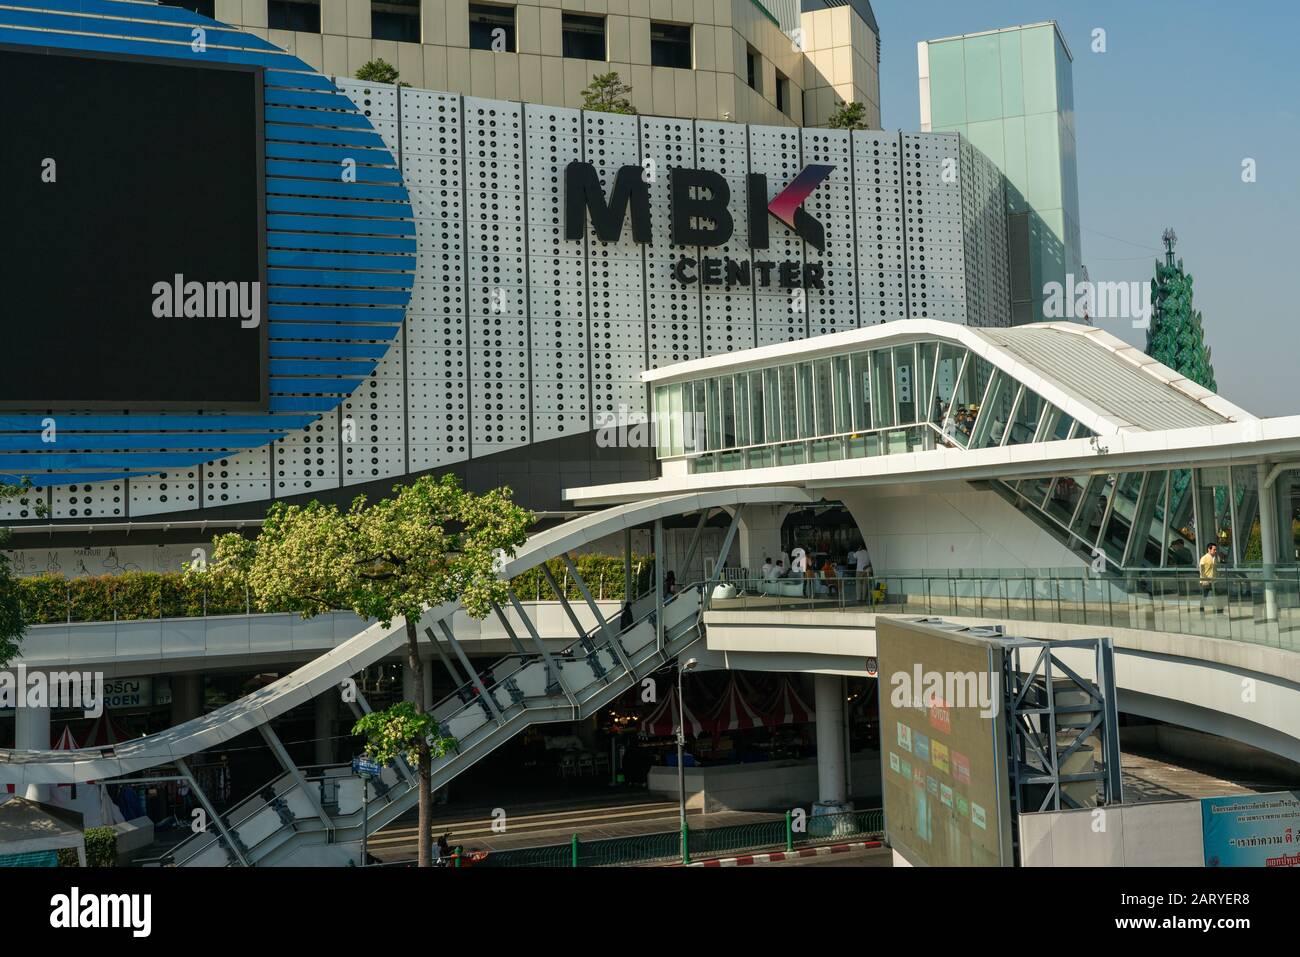 Mbk Shopping Center Mbk Is A Big Shopping Mall With Restaurants